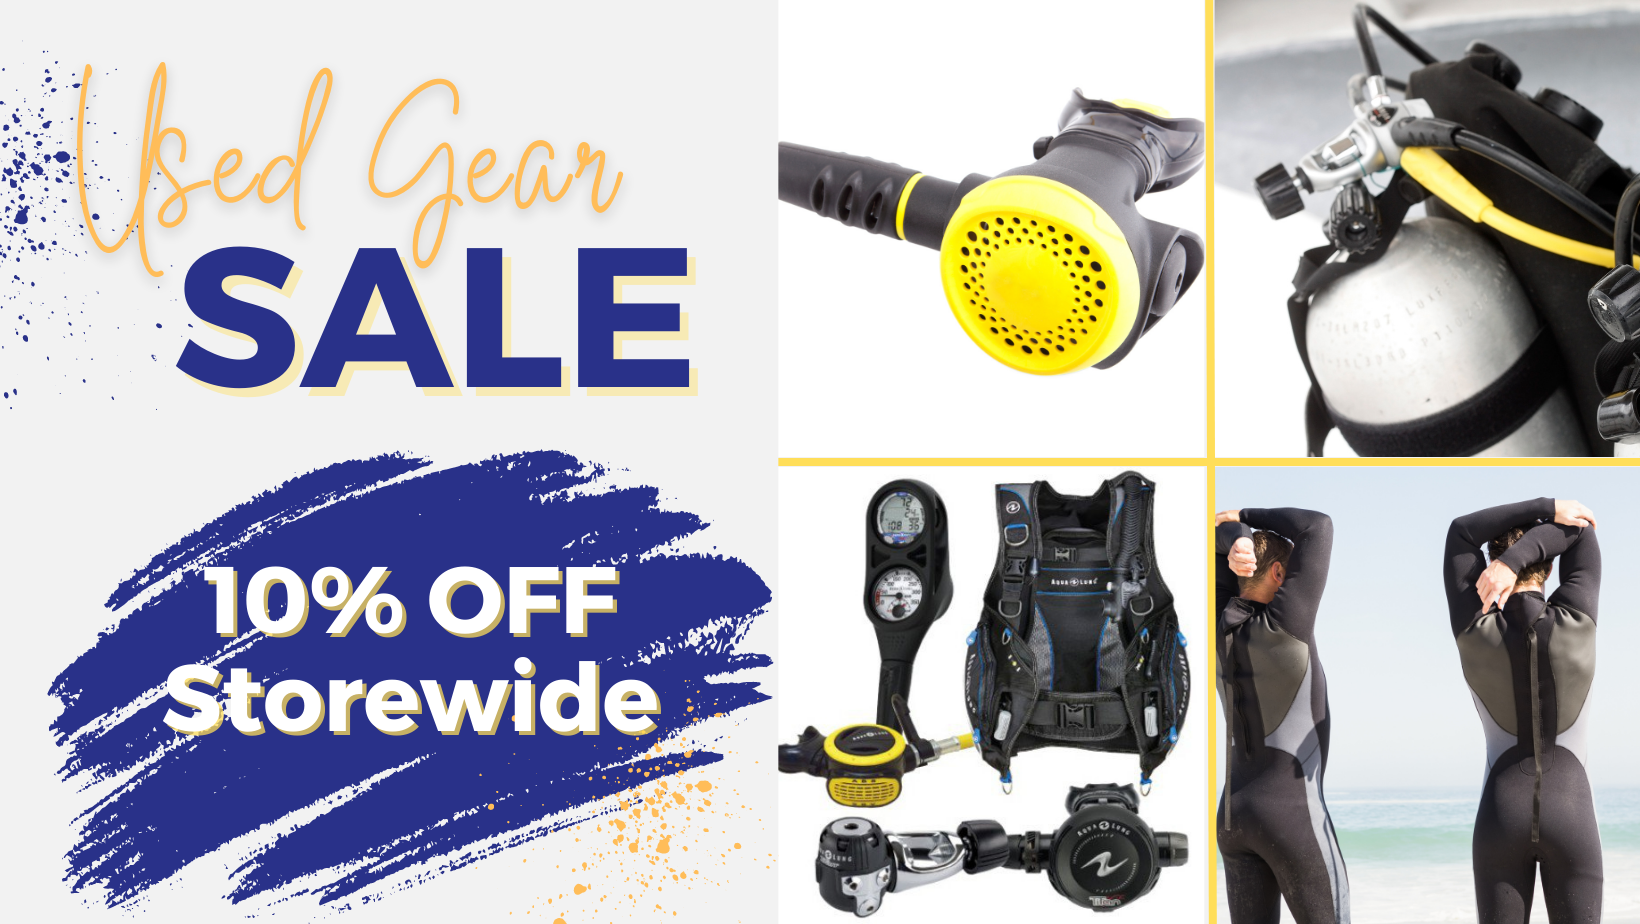 All-day Storewide Sale: Featuring New & Used Dive Gear With Discounted Packaged Bundles, And Much More!